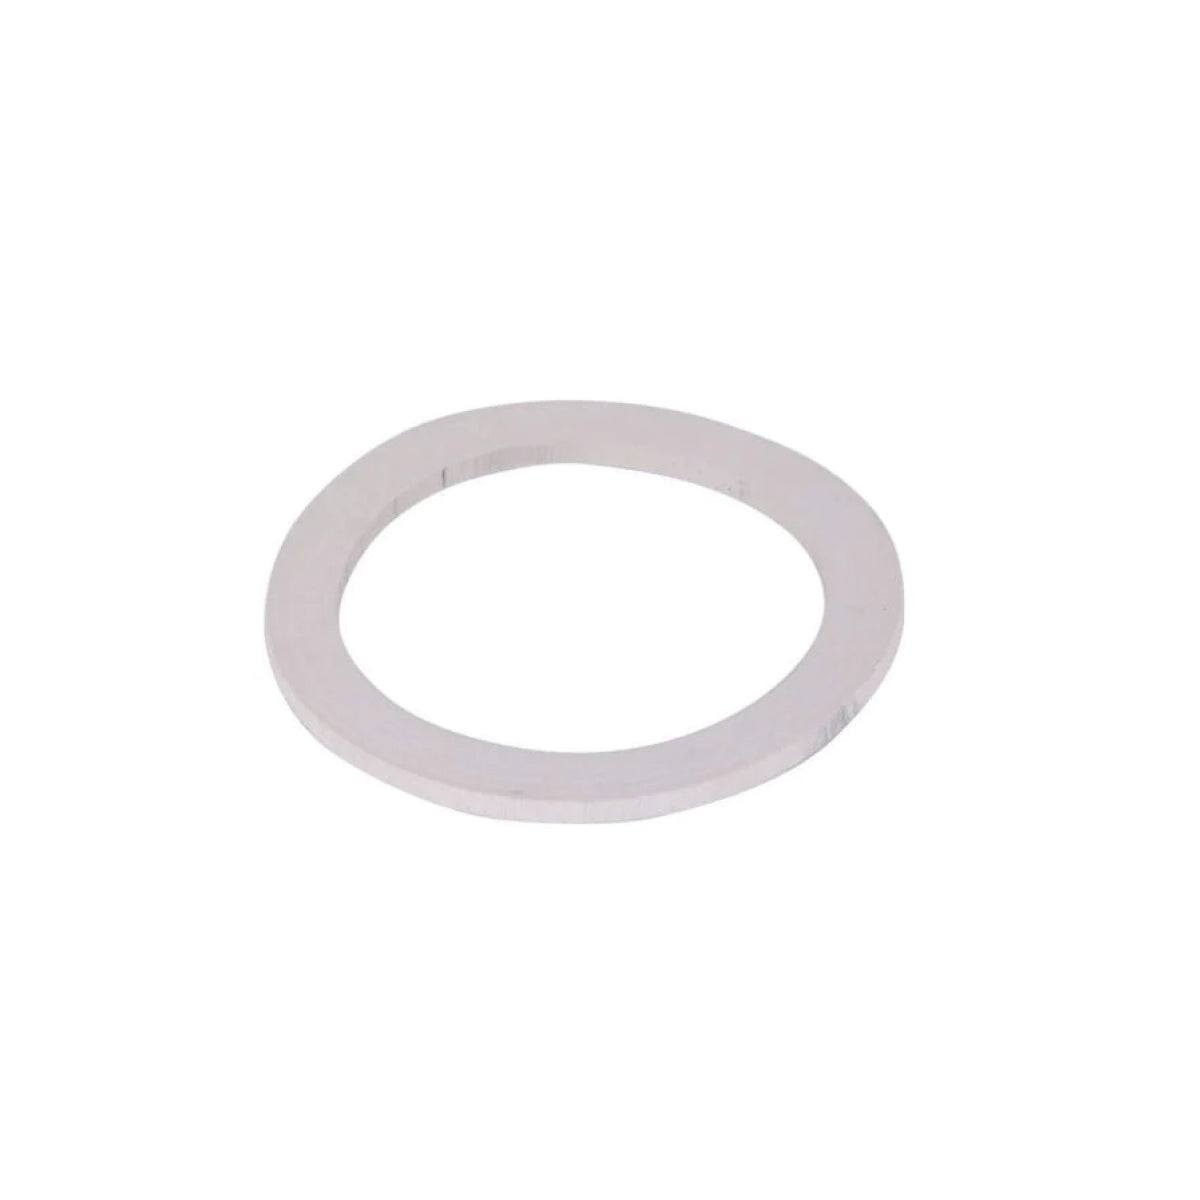 Ilsa Omnia Replacement Gaskets - Set of 3